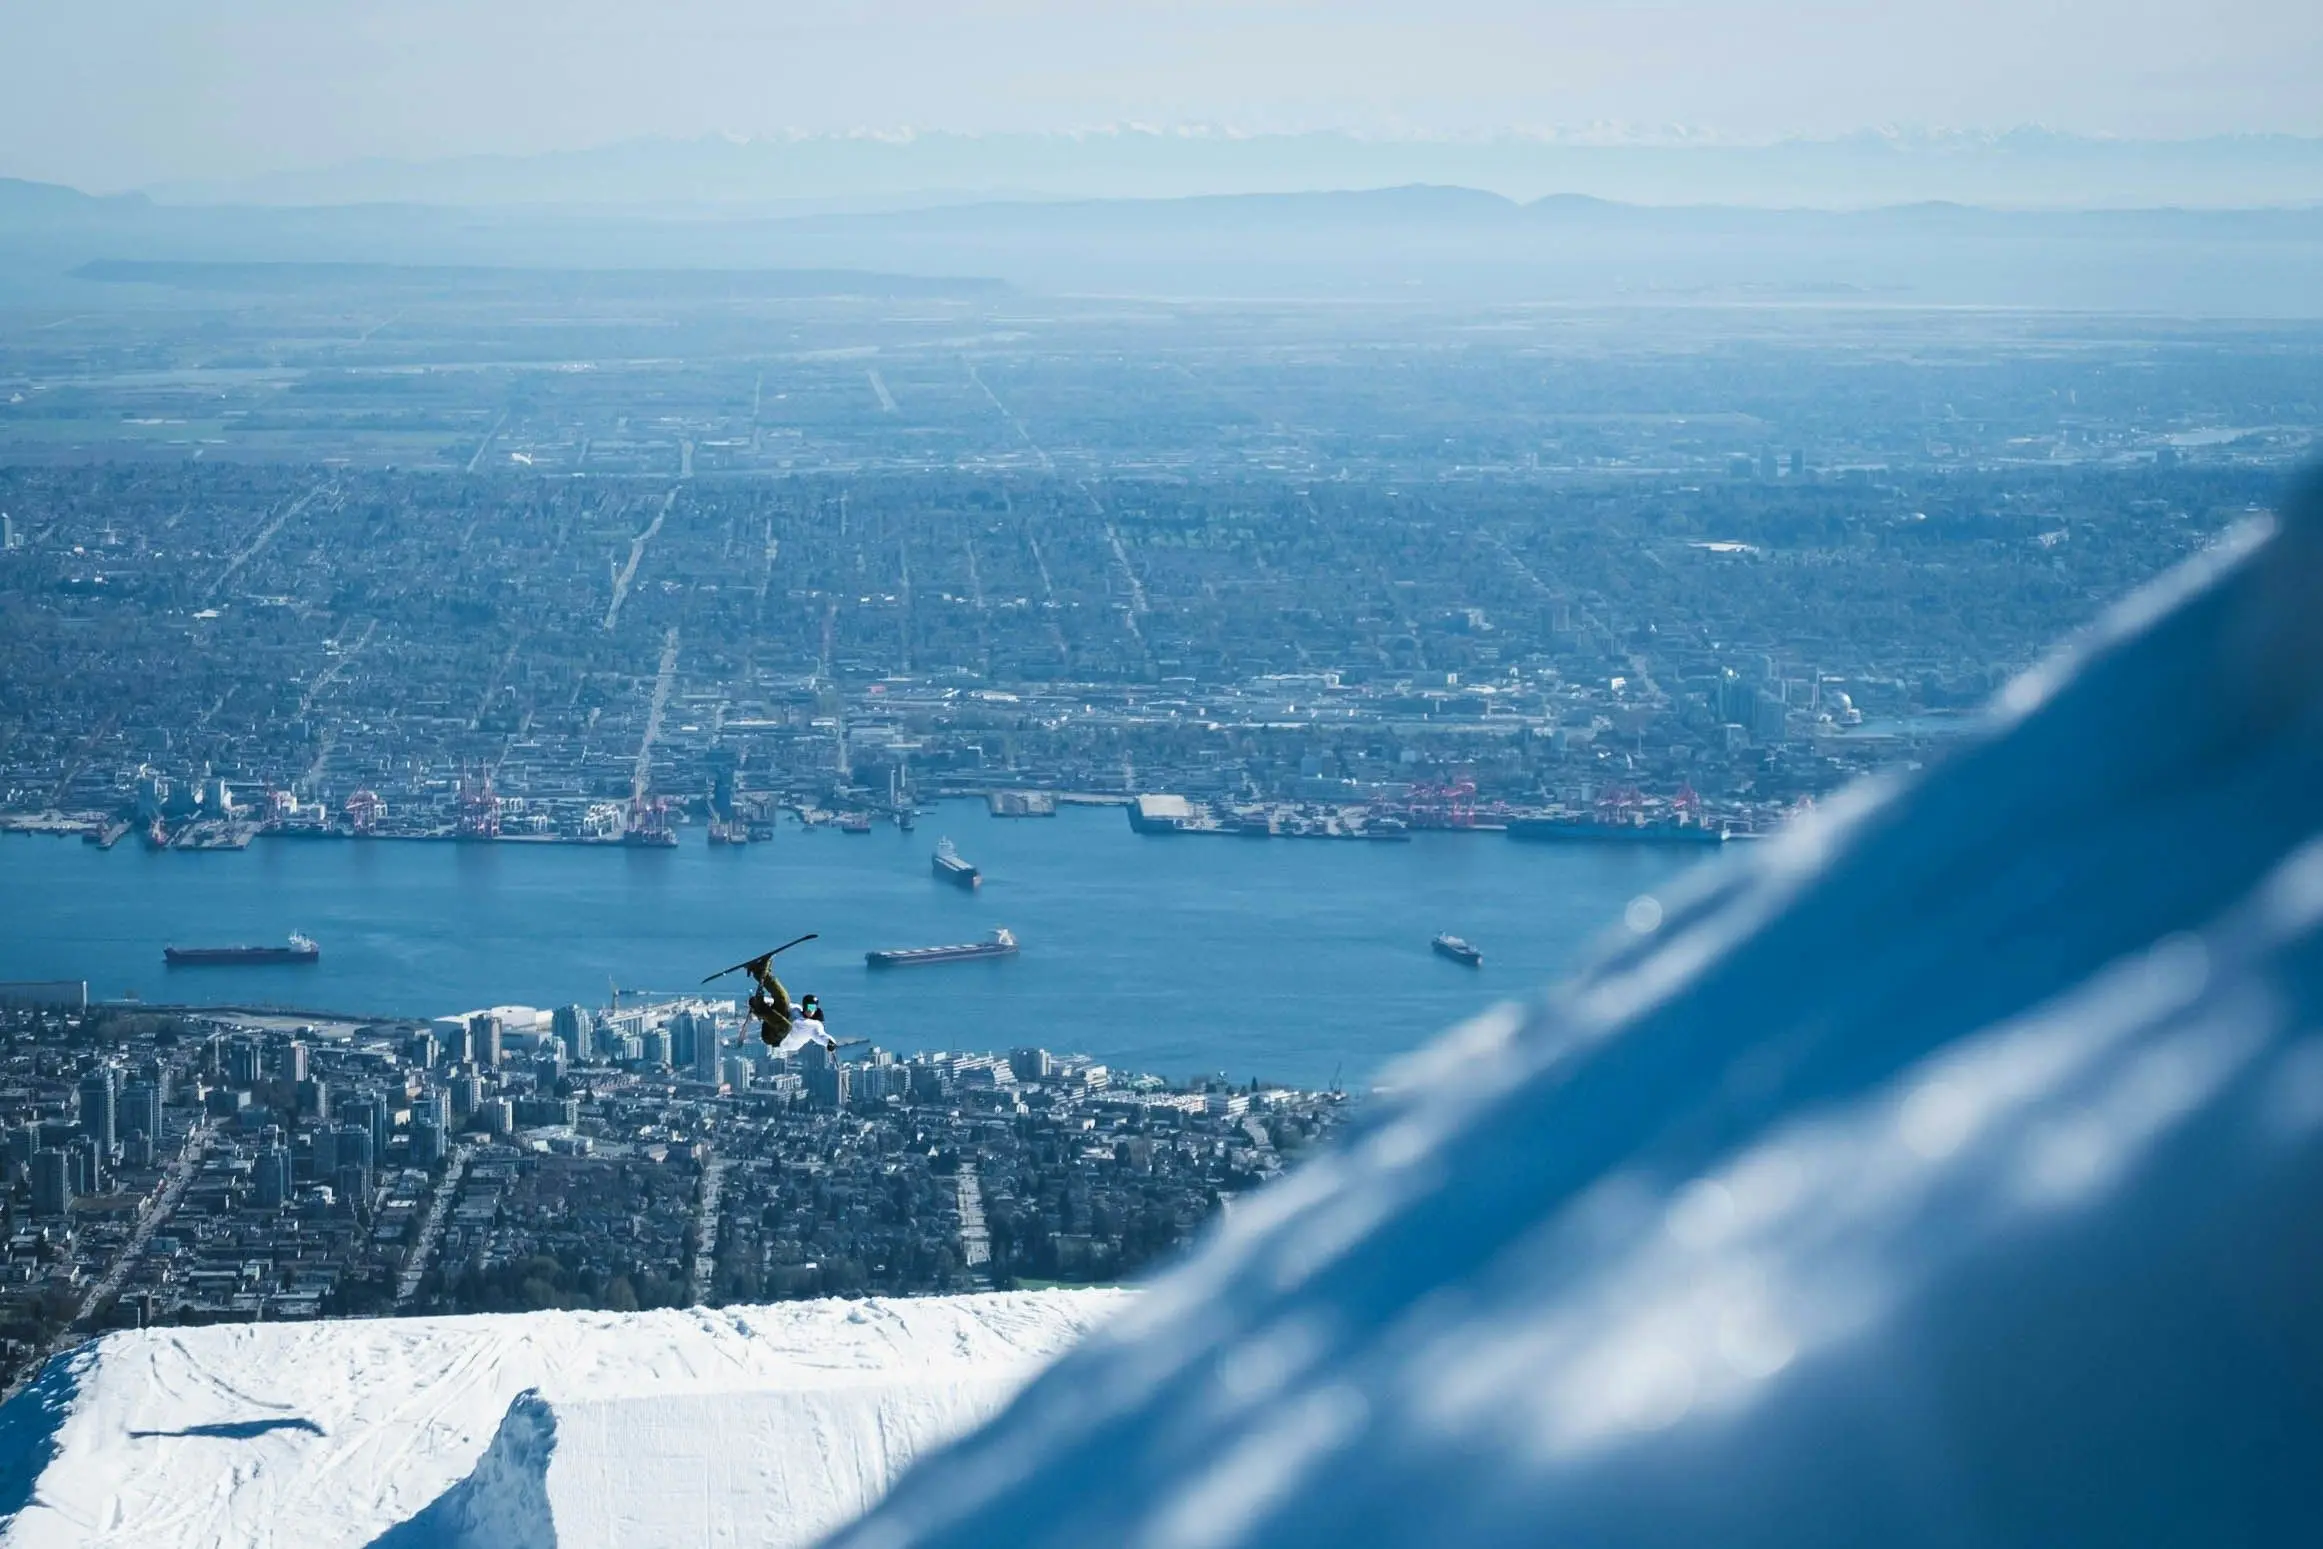 View of Vancouver from Grouse Mountain ski resort